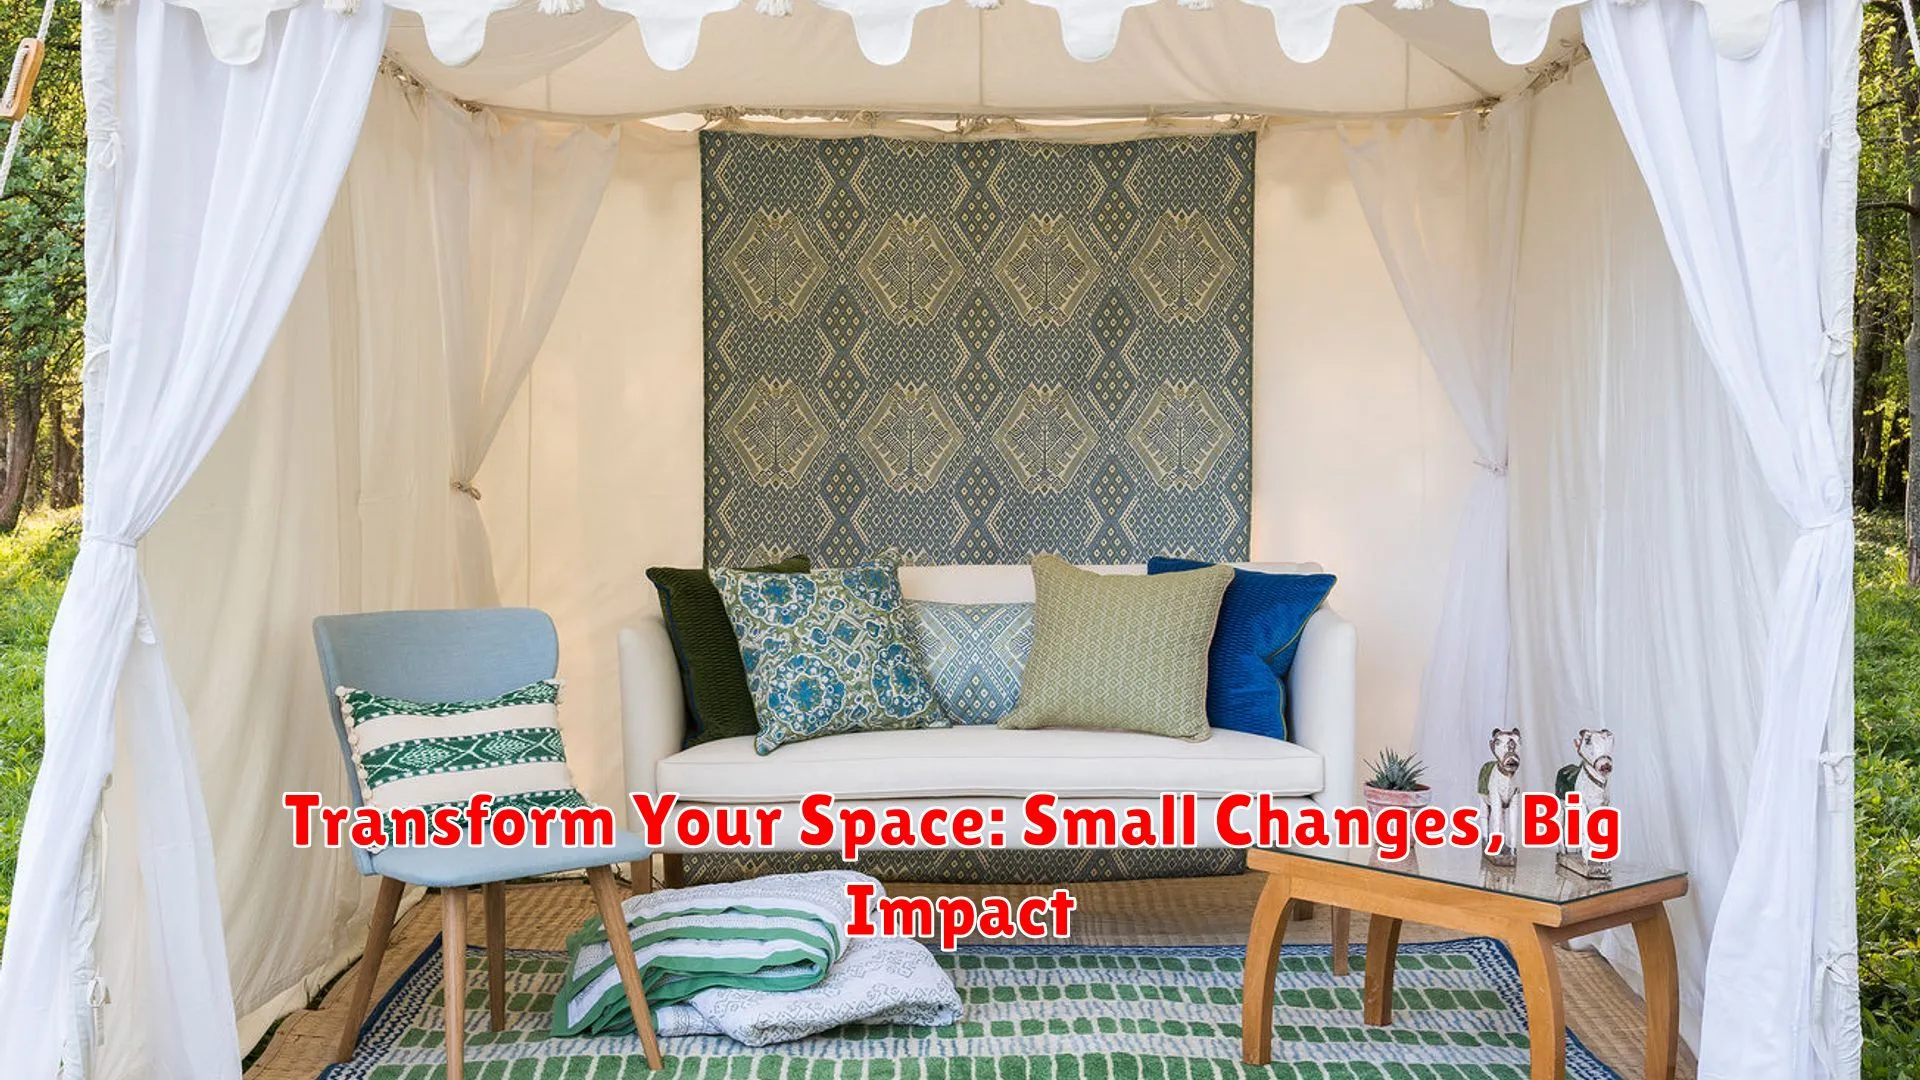 Transform Your Space: Small Changes, Big Impact - Ngerank